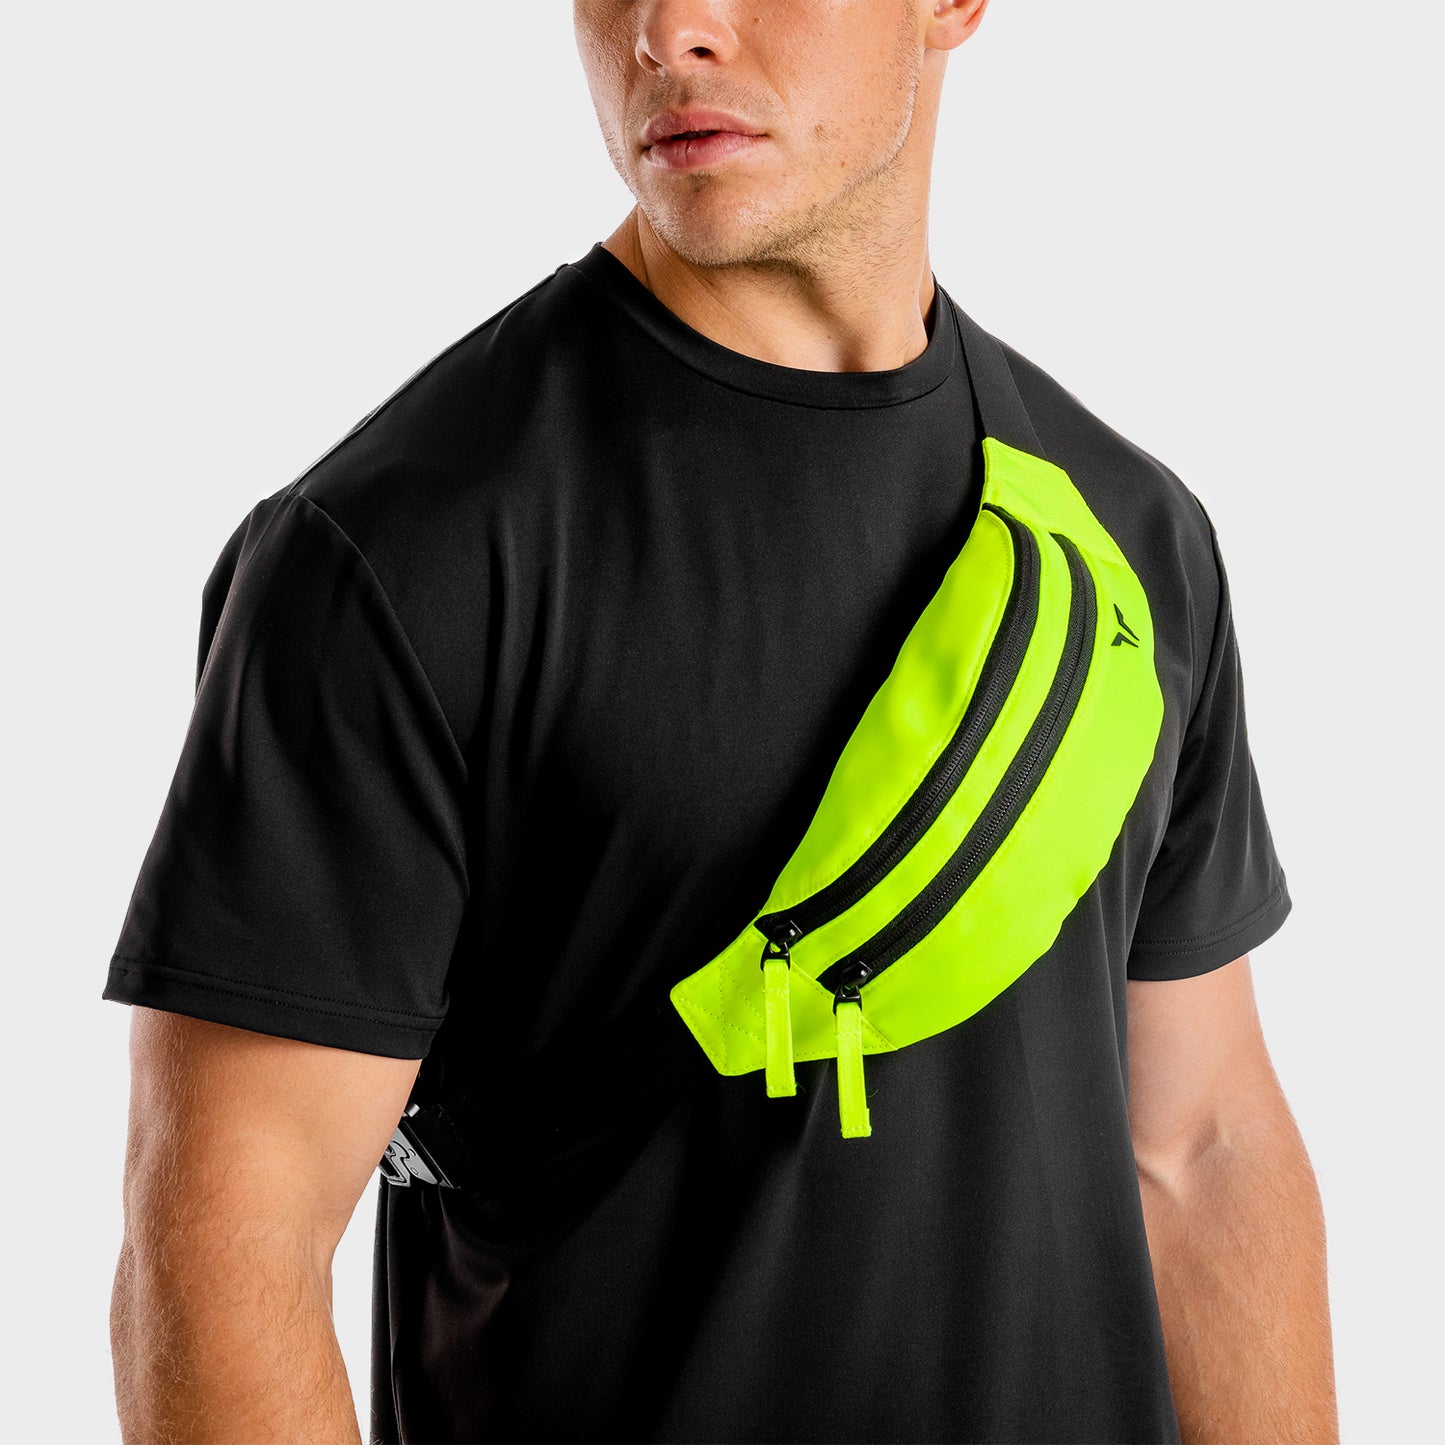 squatwolf-gym-wear-core-bumbag-neon-gym-accessories